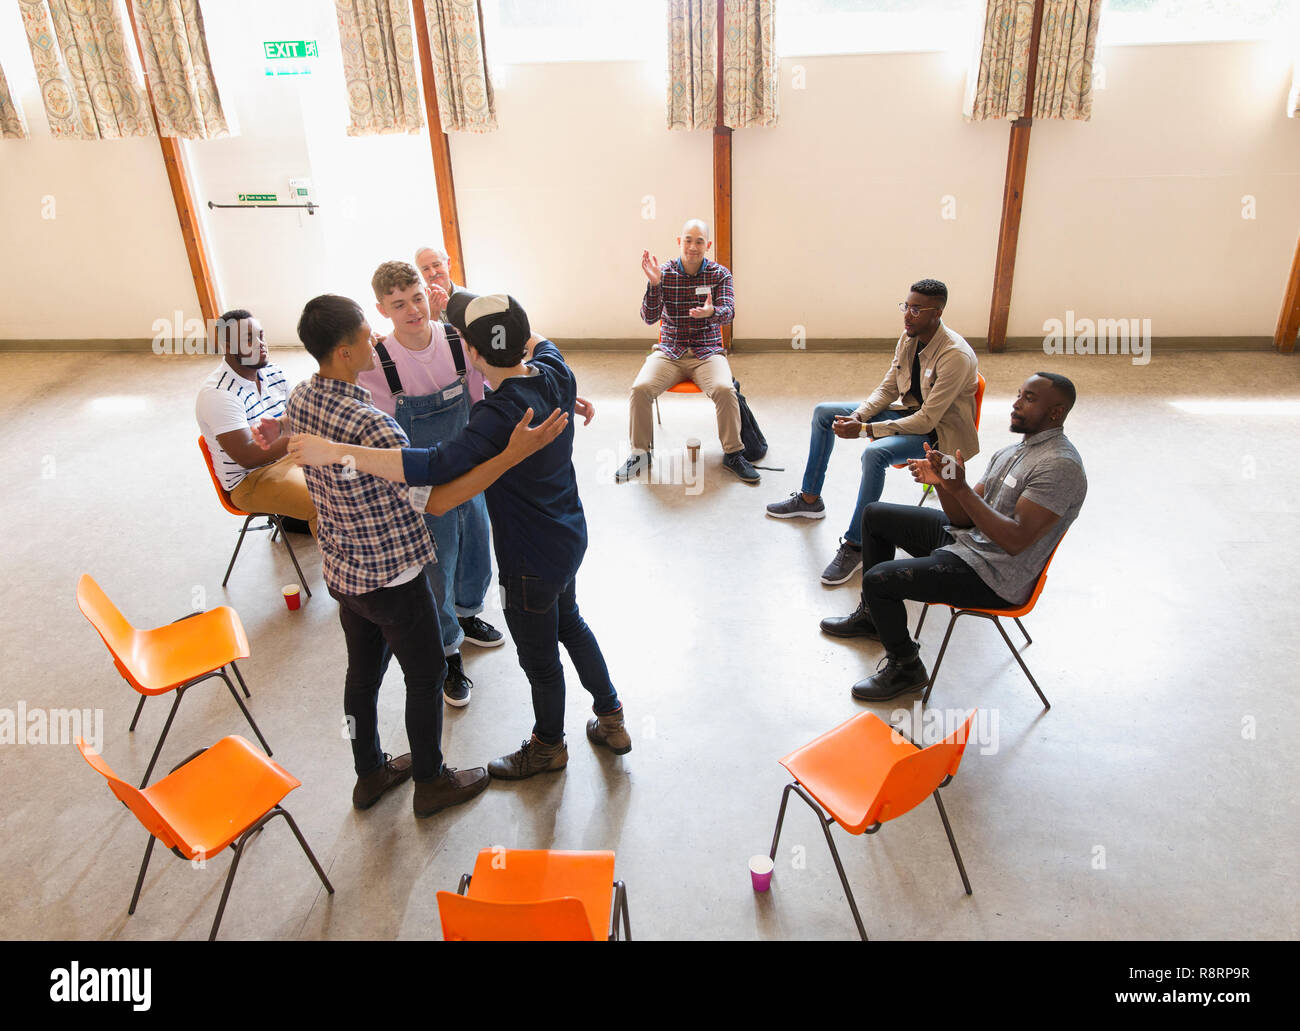 Men hugging and clapping in group therapy Stock Photo